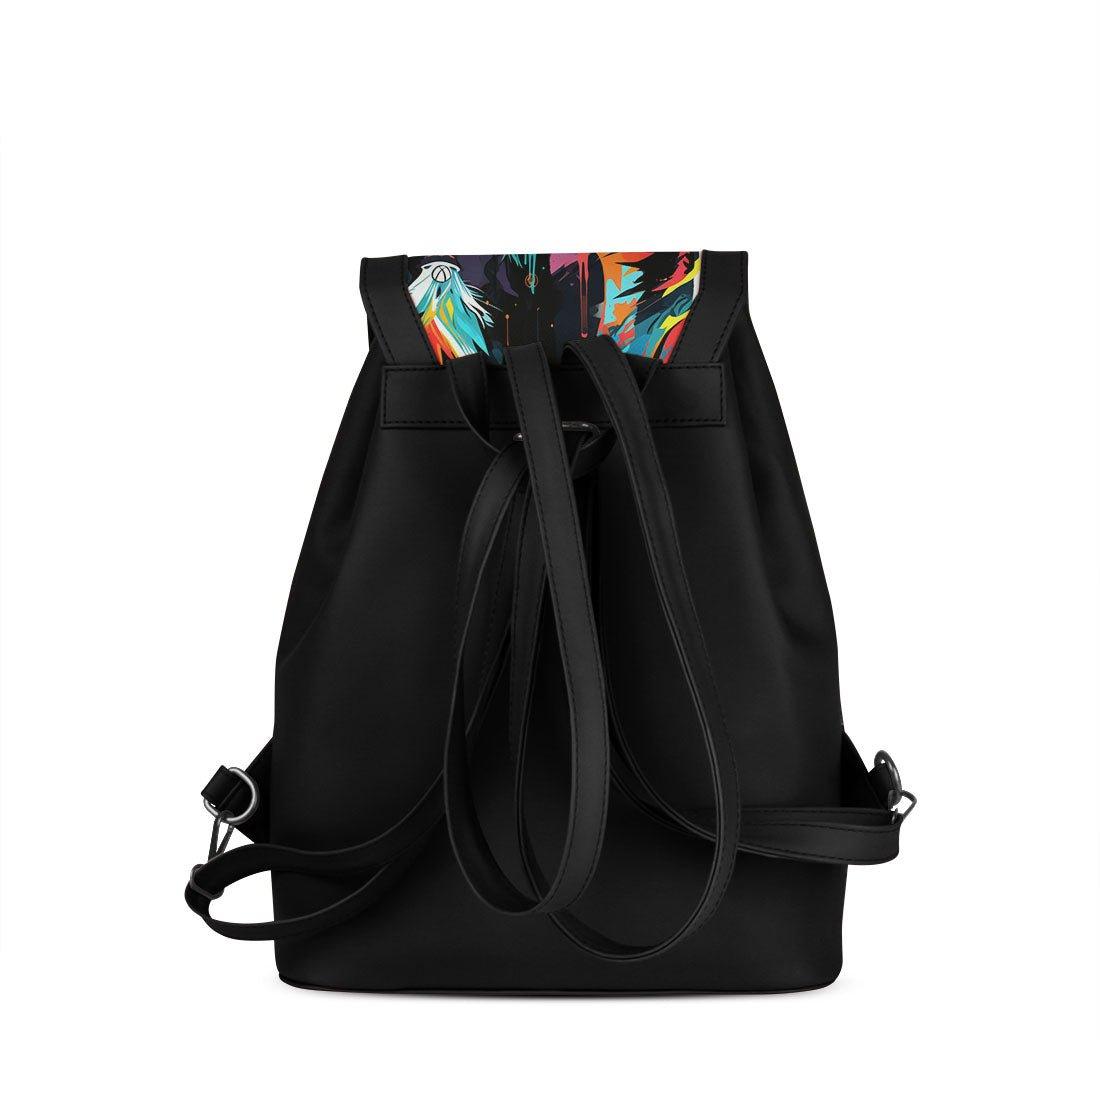 Black City Serenade Backpack Mythical Flame - CANVAEGYPT